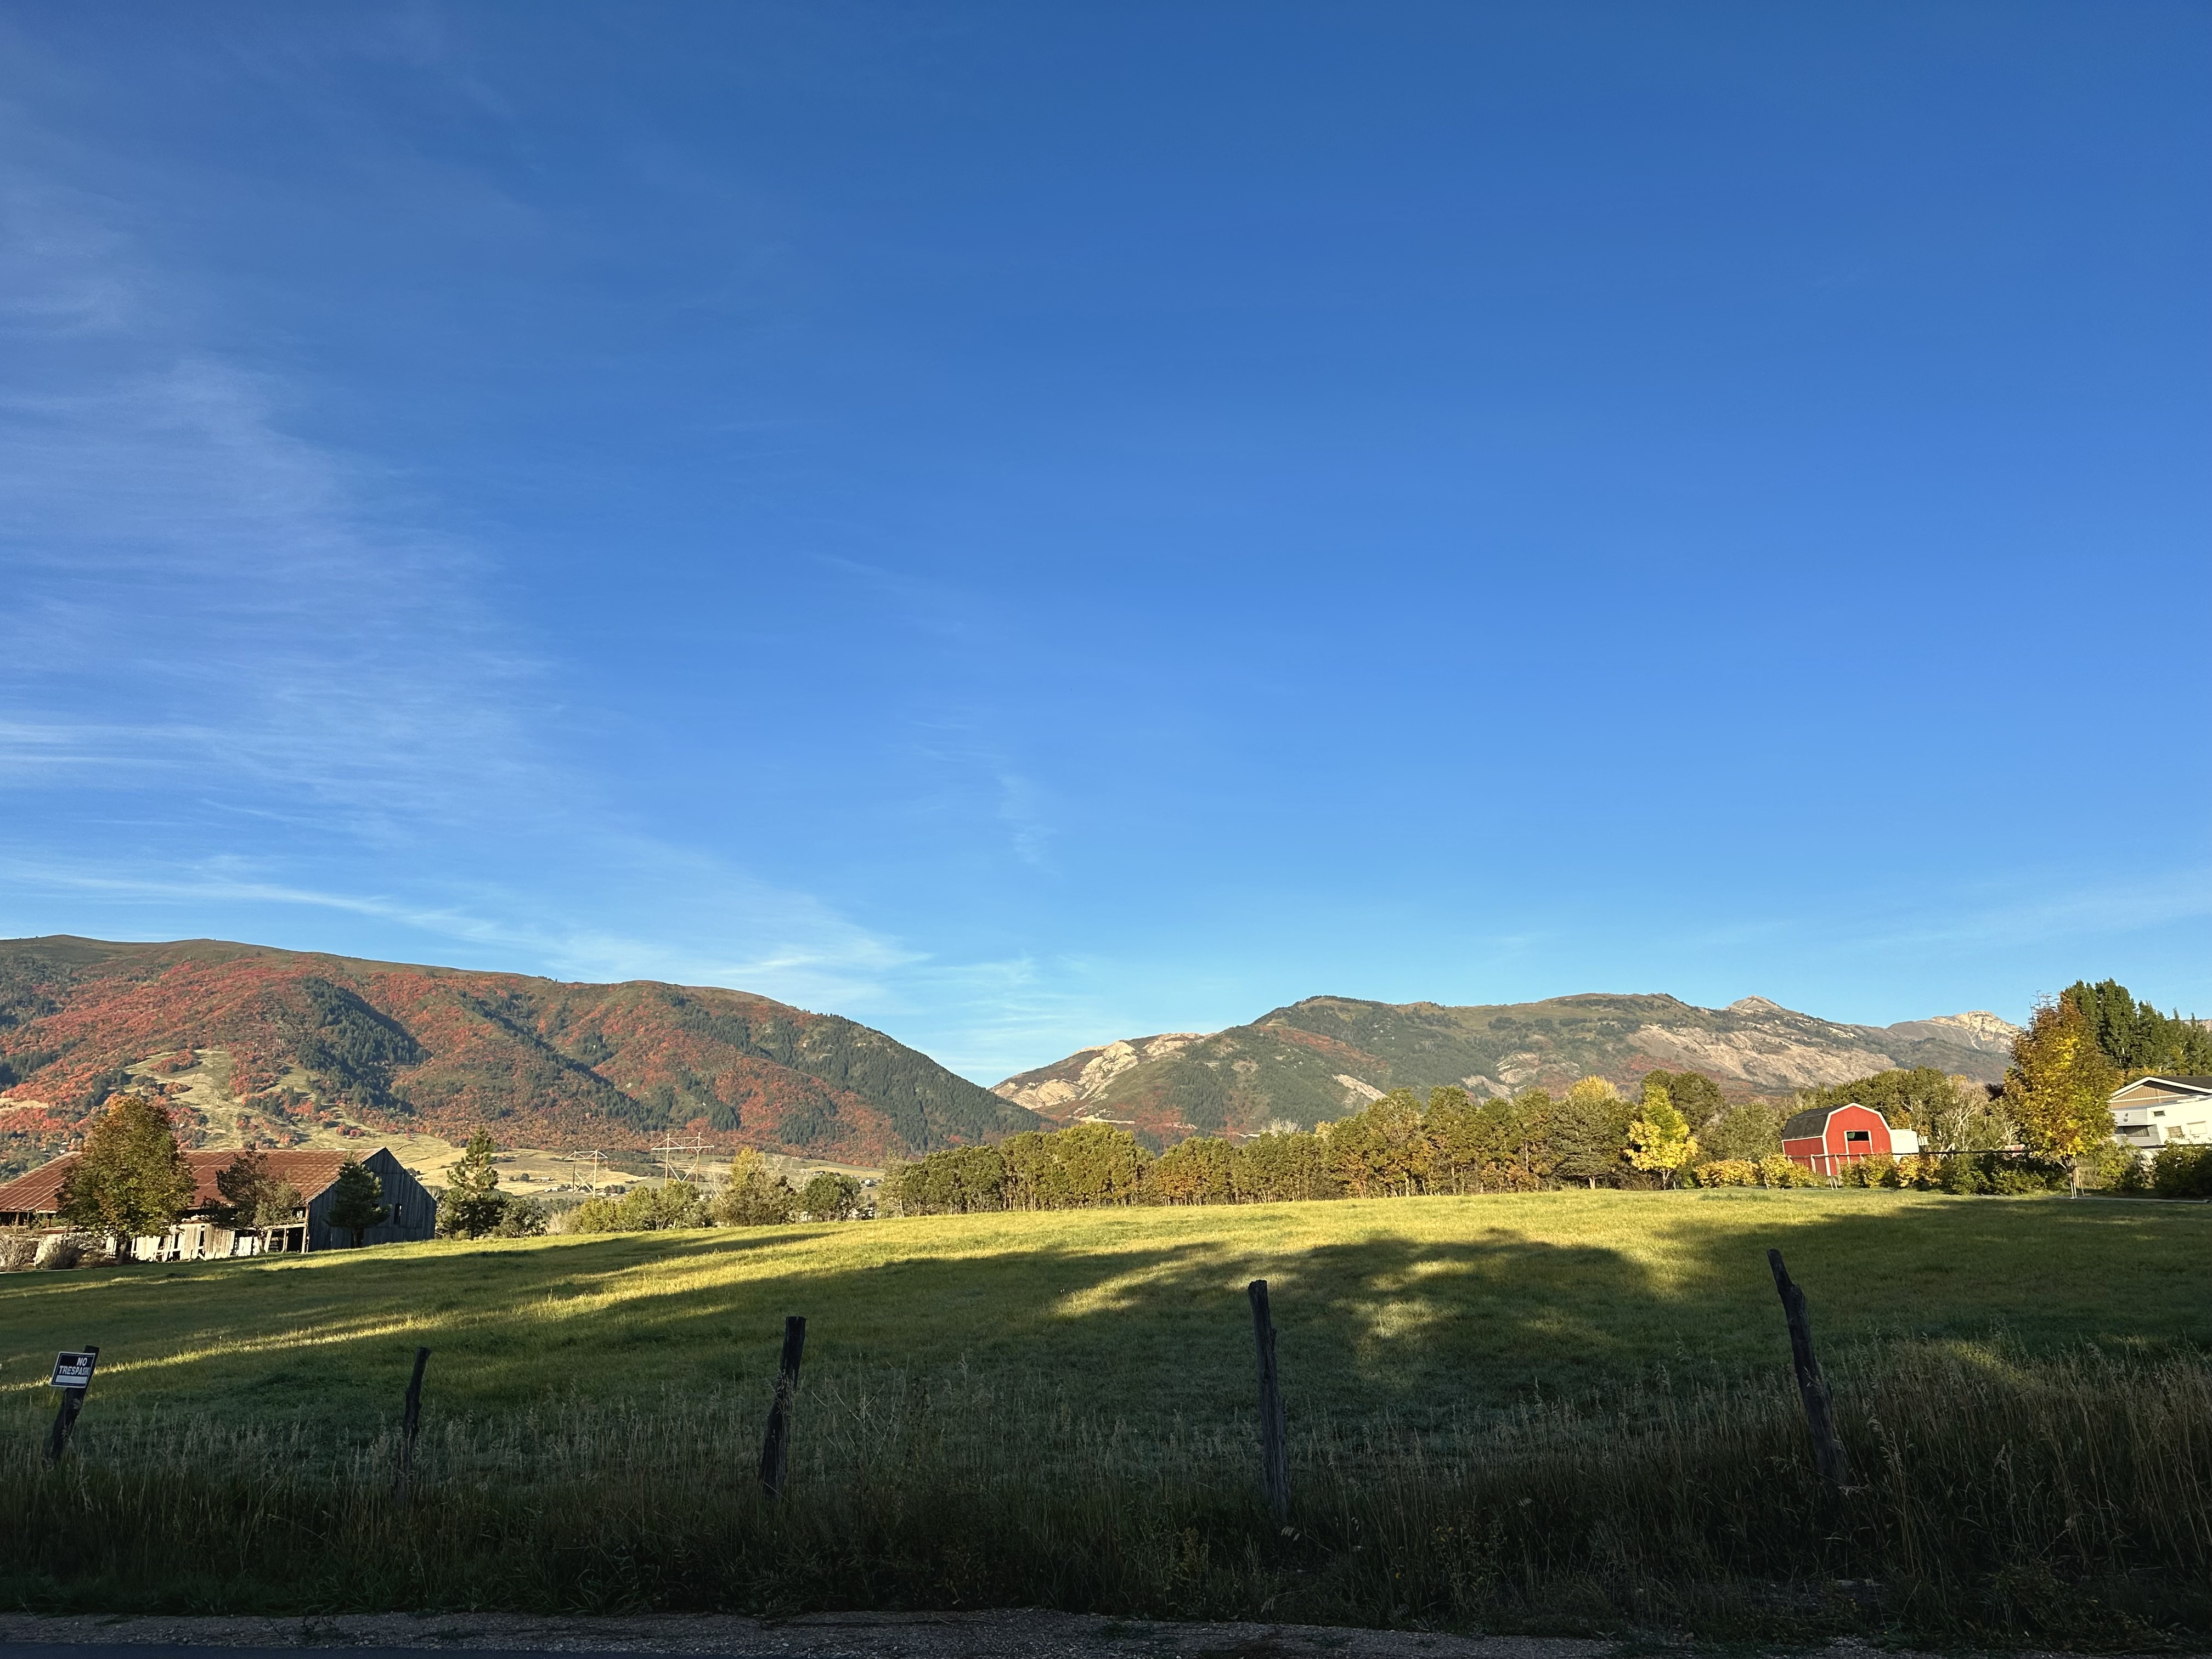 A mostly green pasture with a ridge of mountains beyond it. The ridge is streaked with red and orange fall colors.